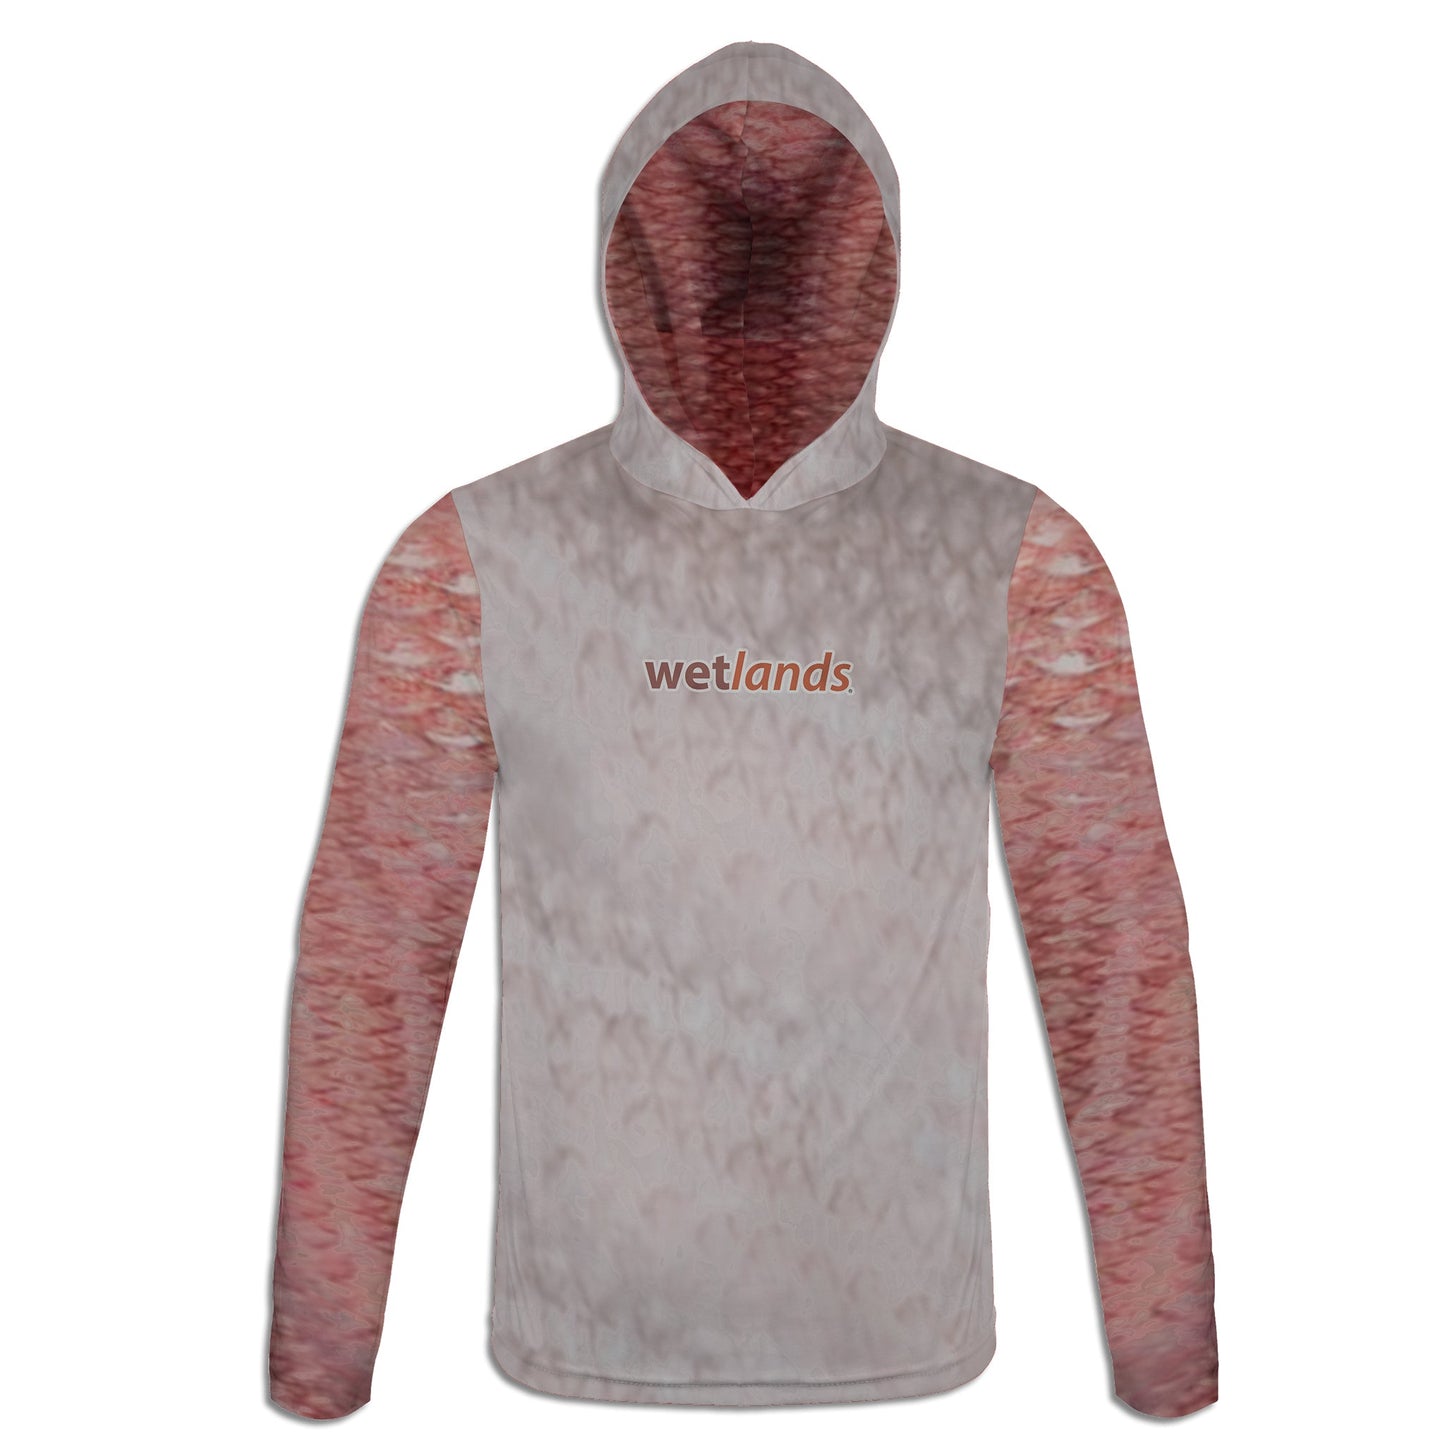 Red Snappers Wetlands Performance Apparel